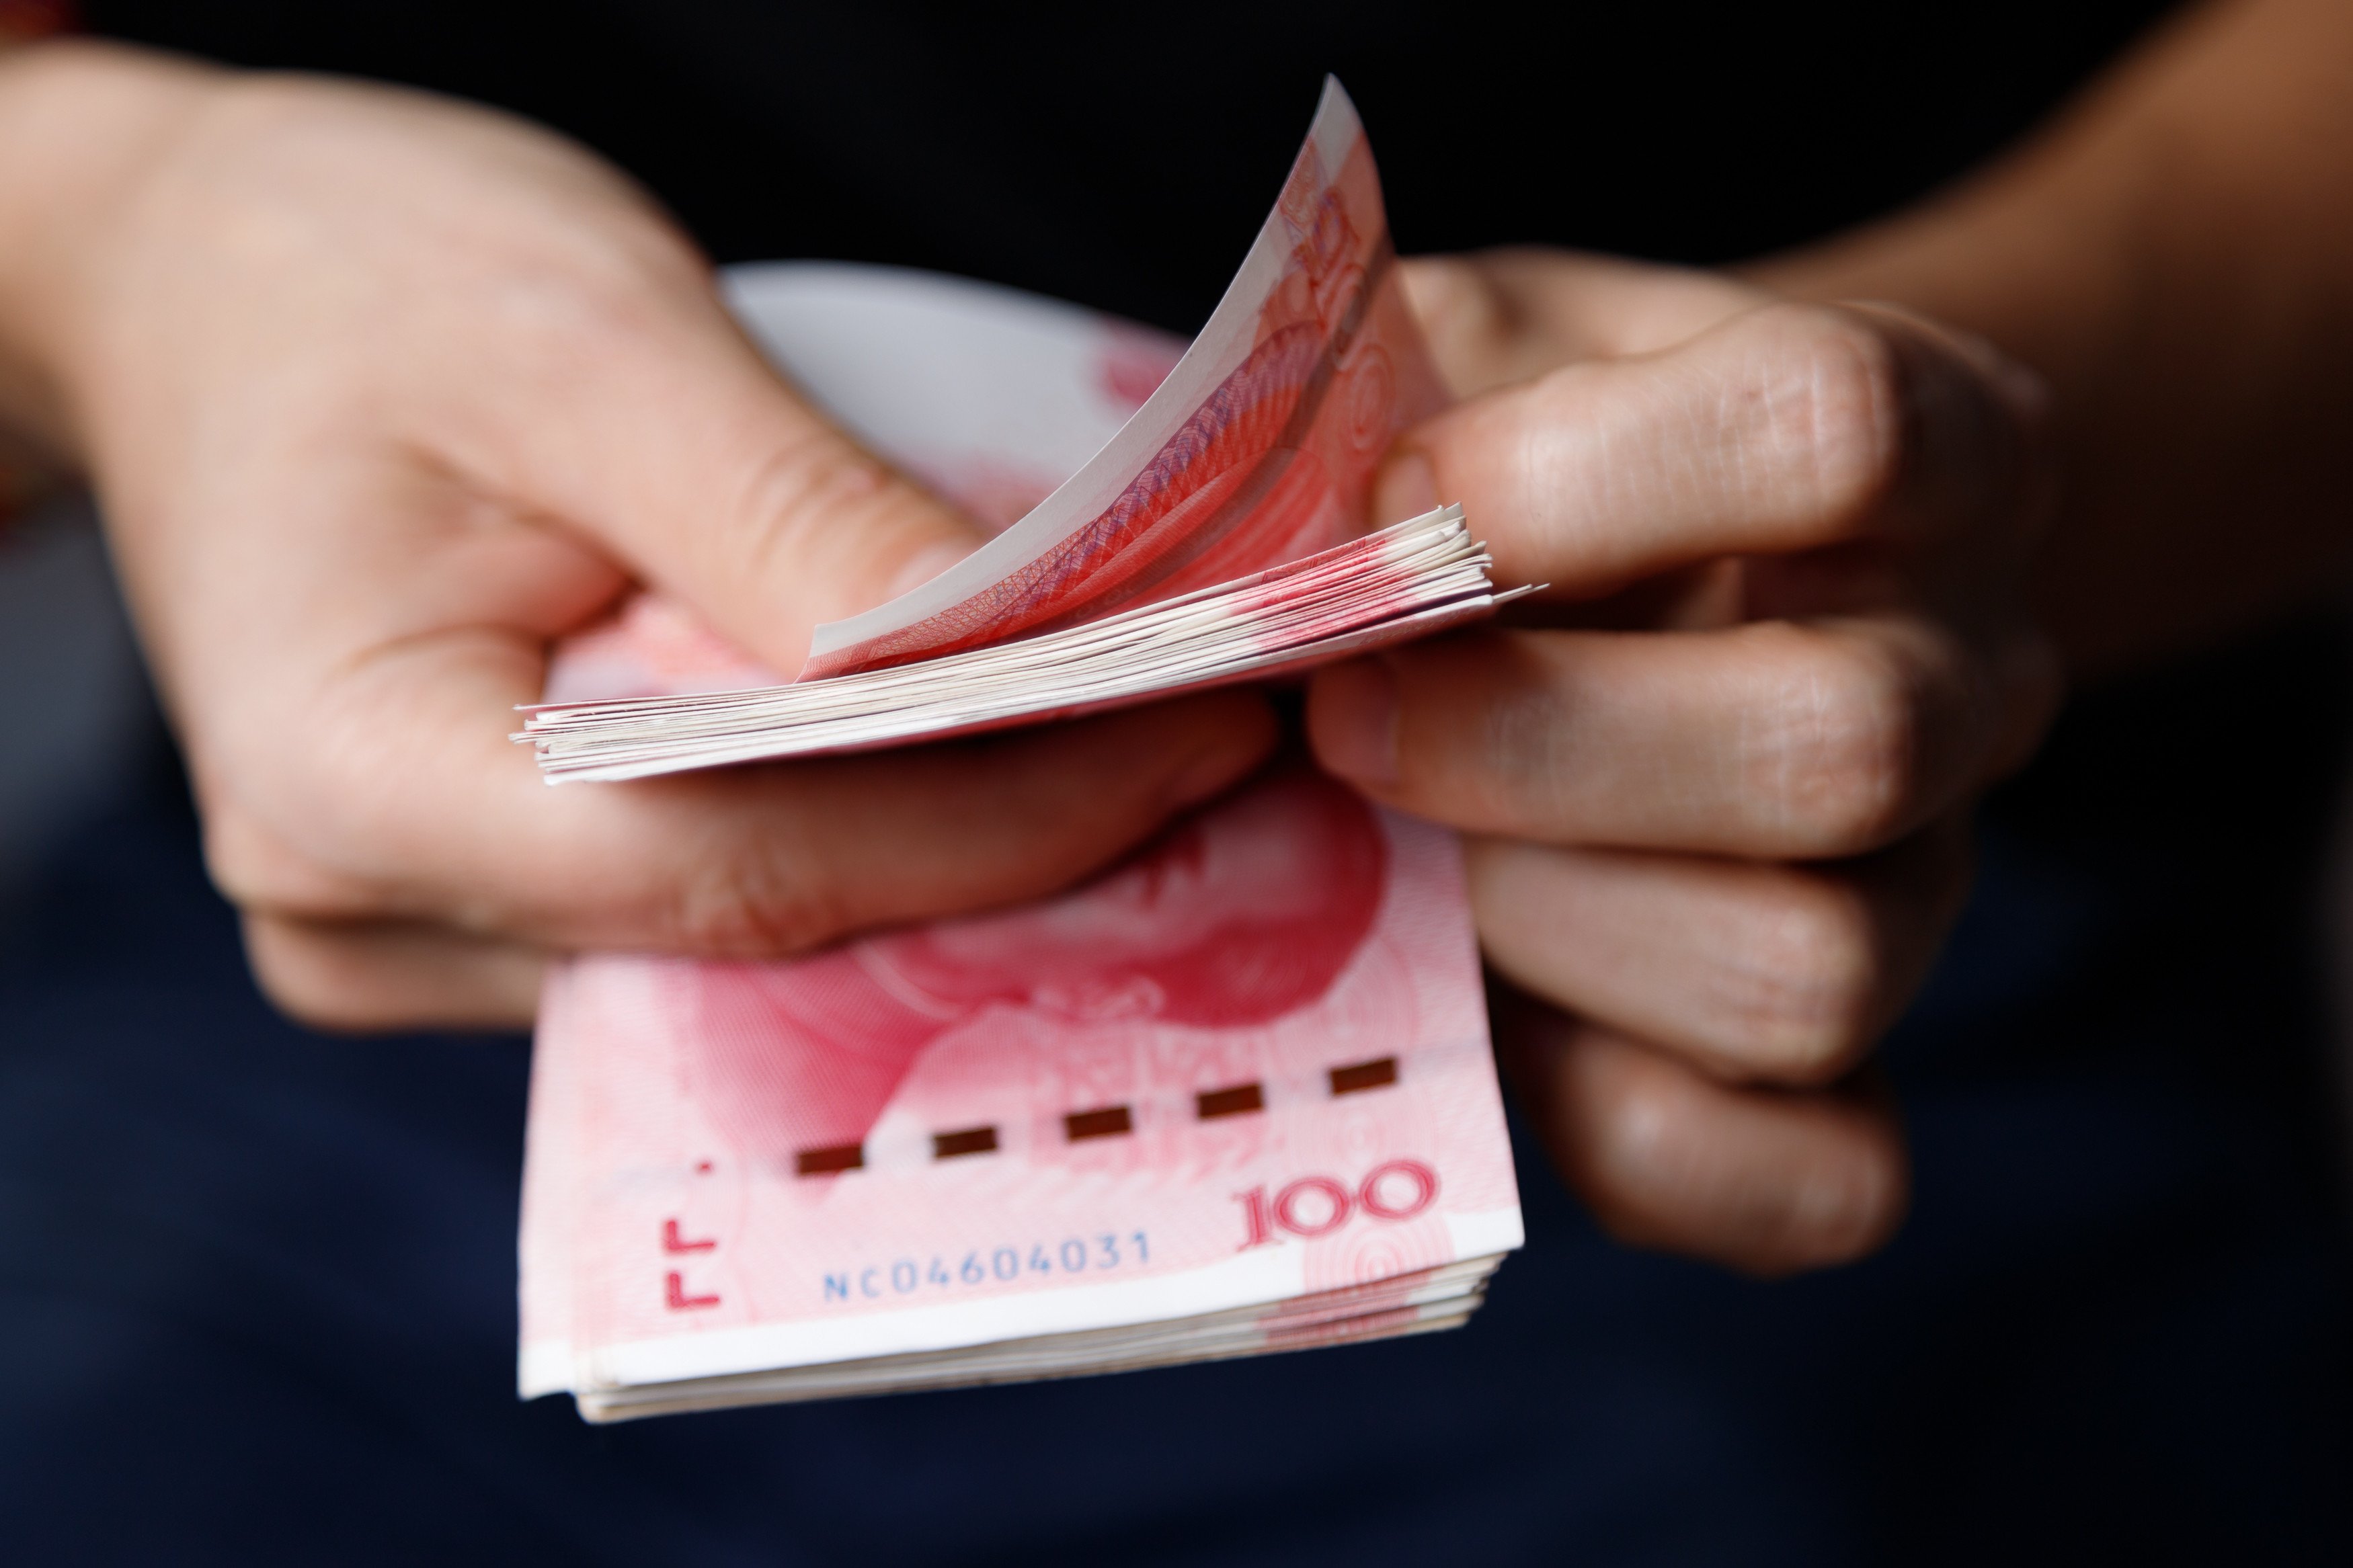 The People’s Bank of China wants to ensure that the yuan does not see excessive fluctuations. Photo: Shutterstock